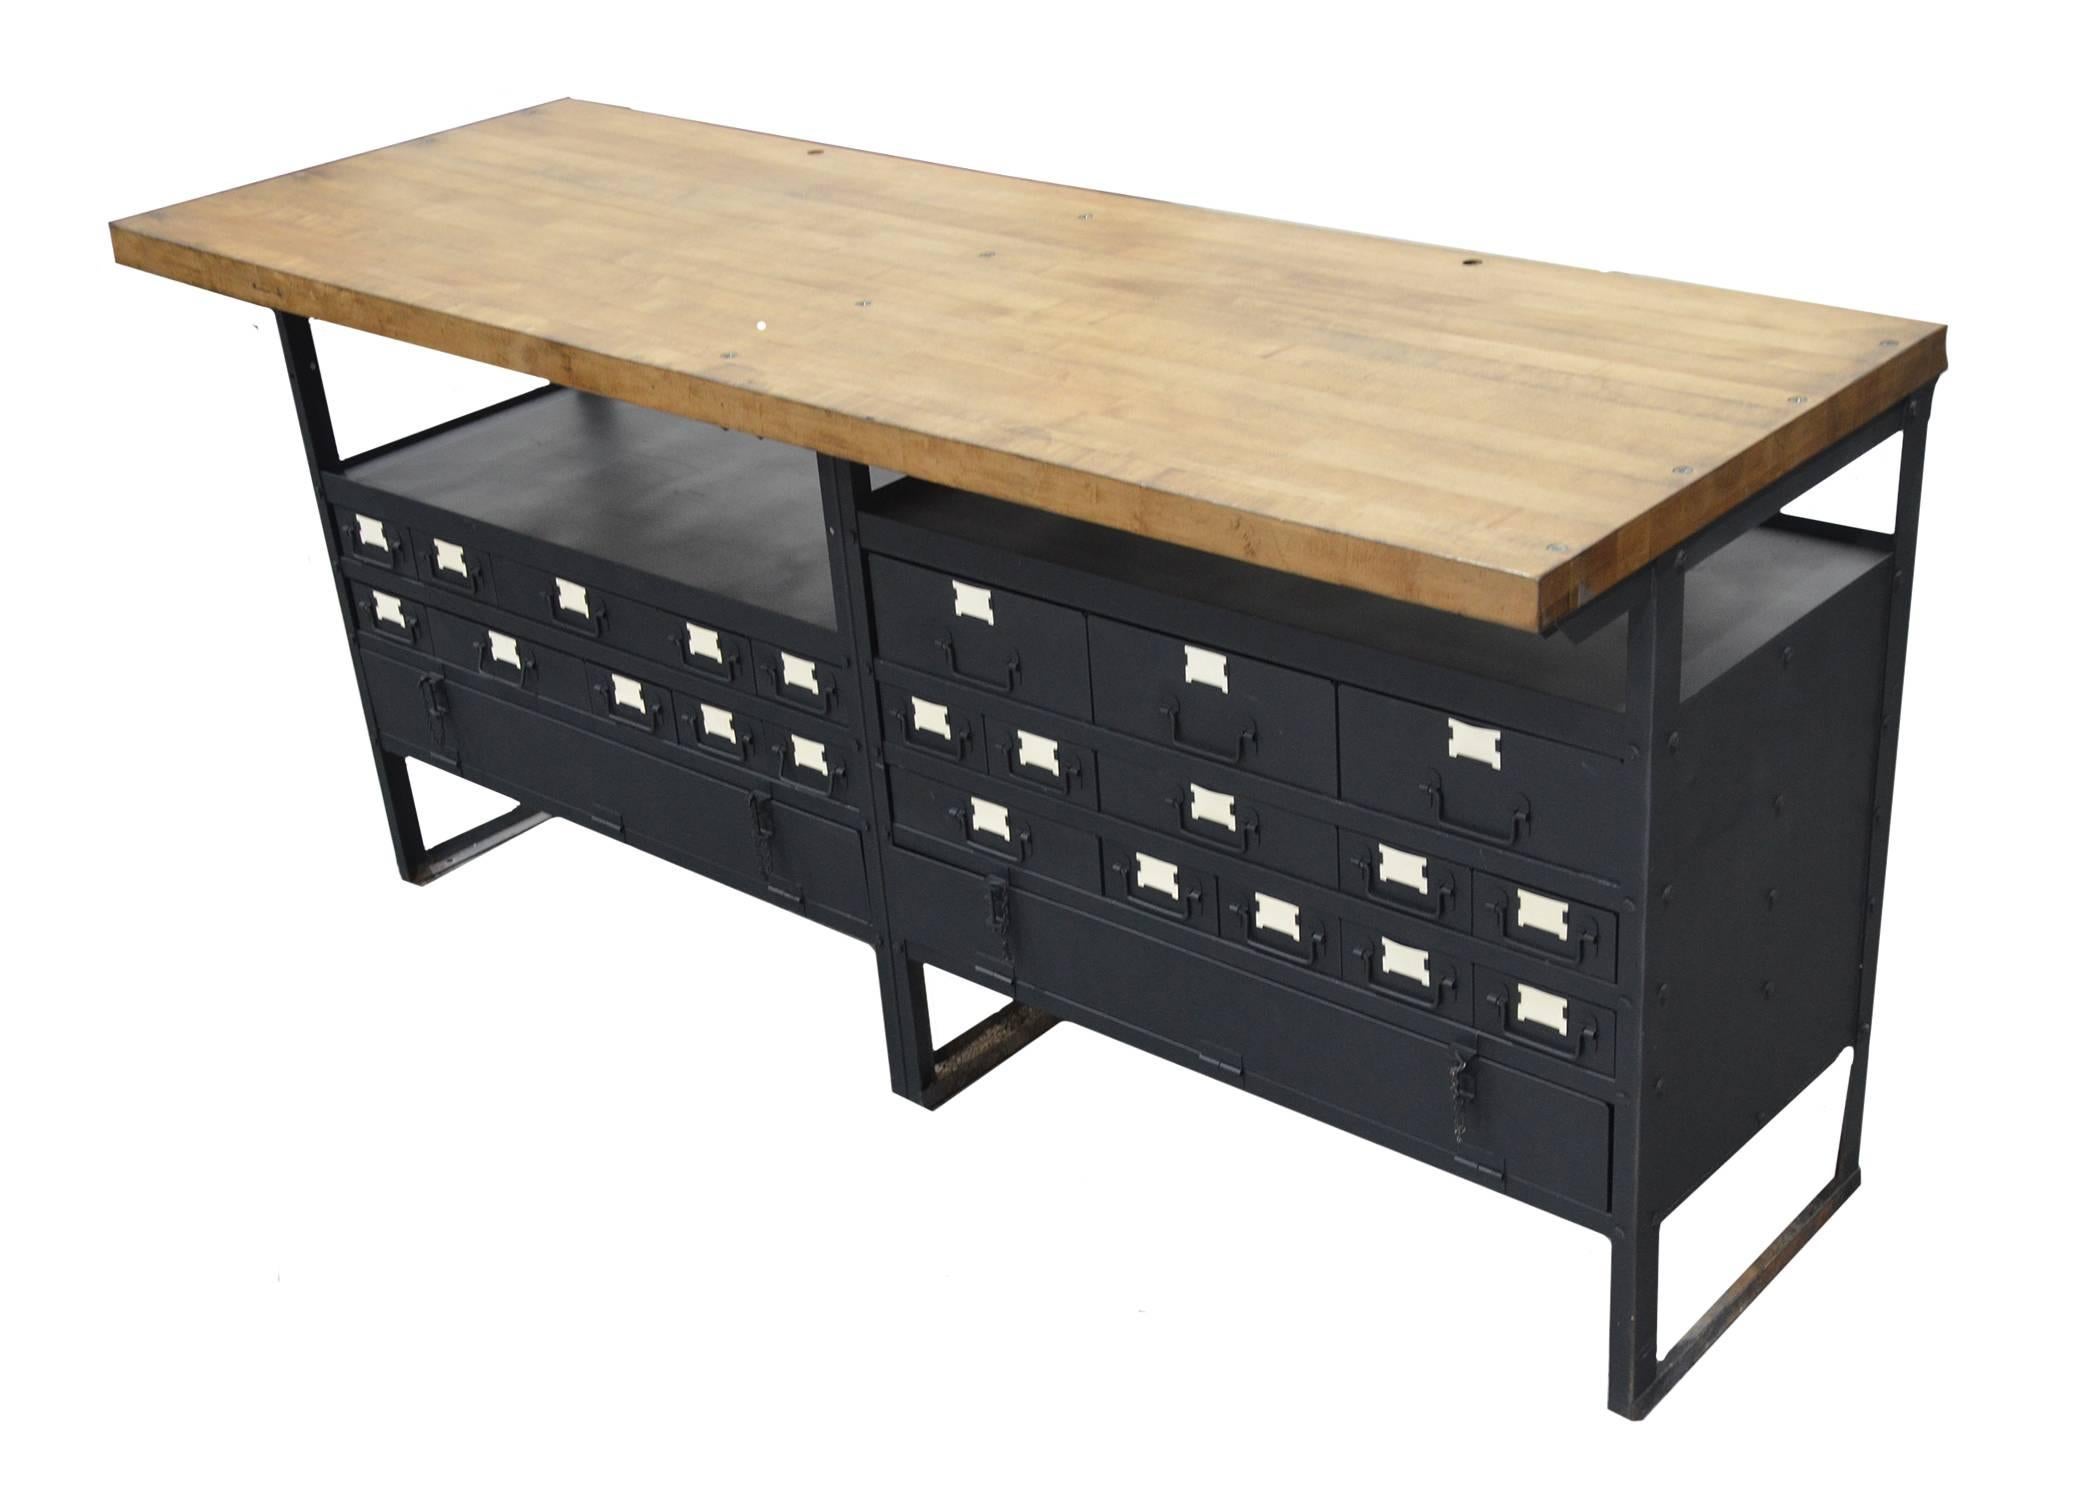 Industrial work table which has been restored for use as a console or center island. Repainted in a dark ink color which reads black / blue with a stained maple wood top. This piece offers great storage with 23 drawers in various sizes as well as